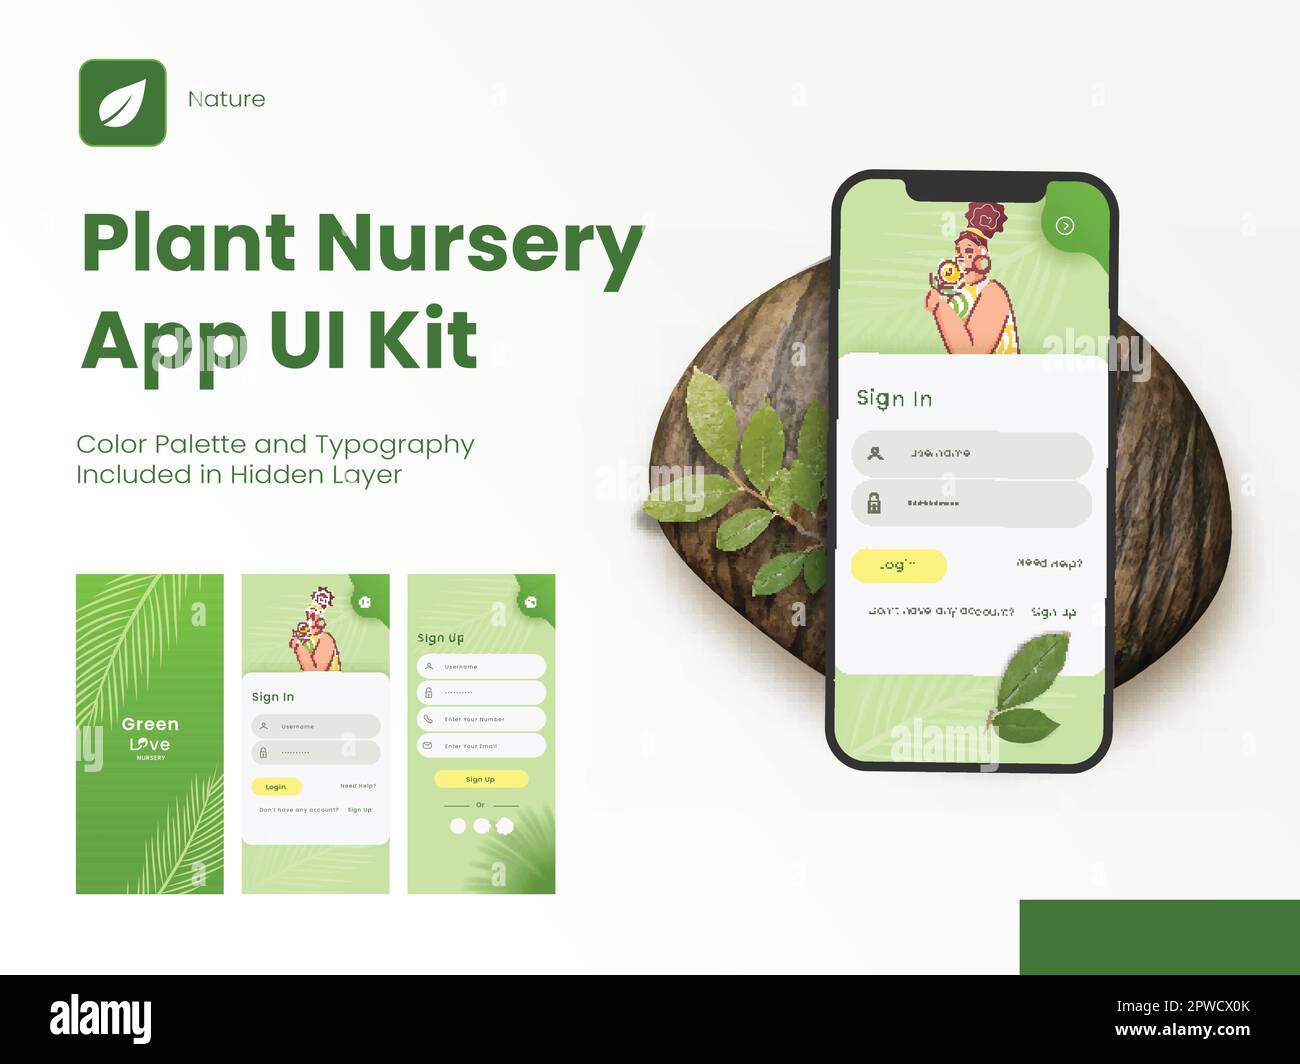 Plant Nursery Application Splash Screens Including Like As Sign In, Sign Up for Mobile App and Responsive Website. Stock Vector